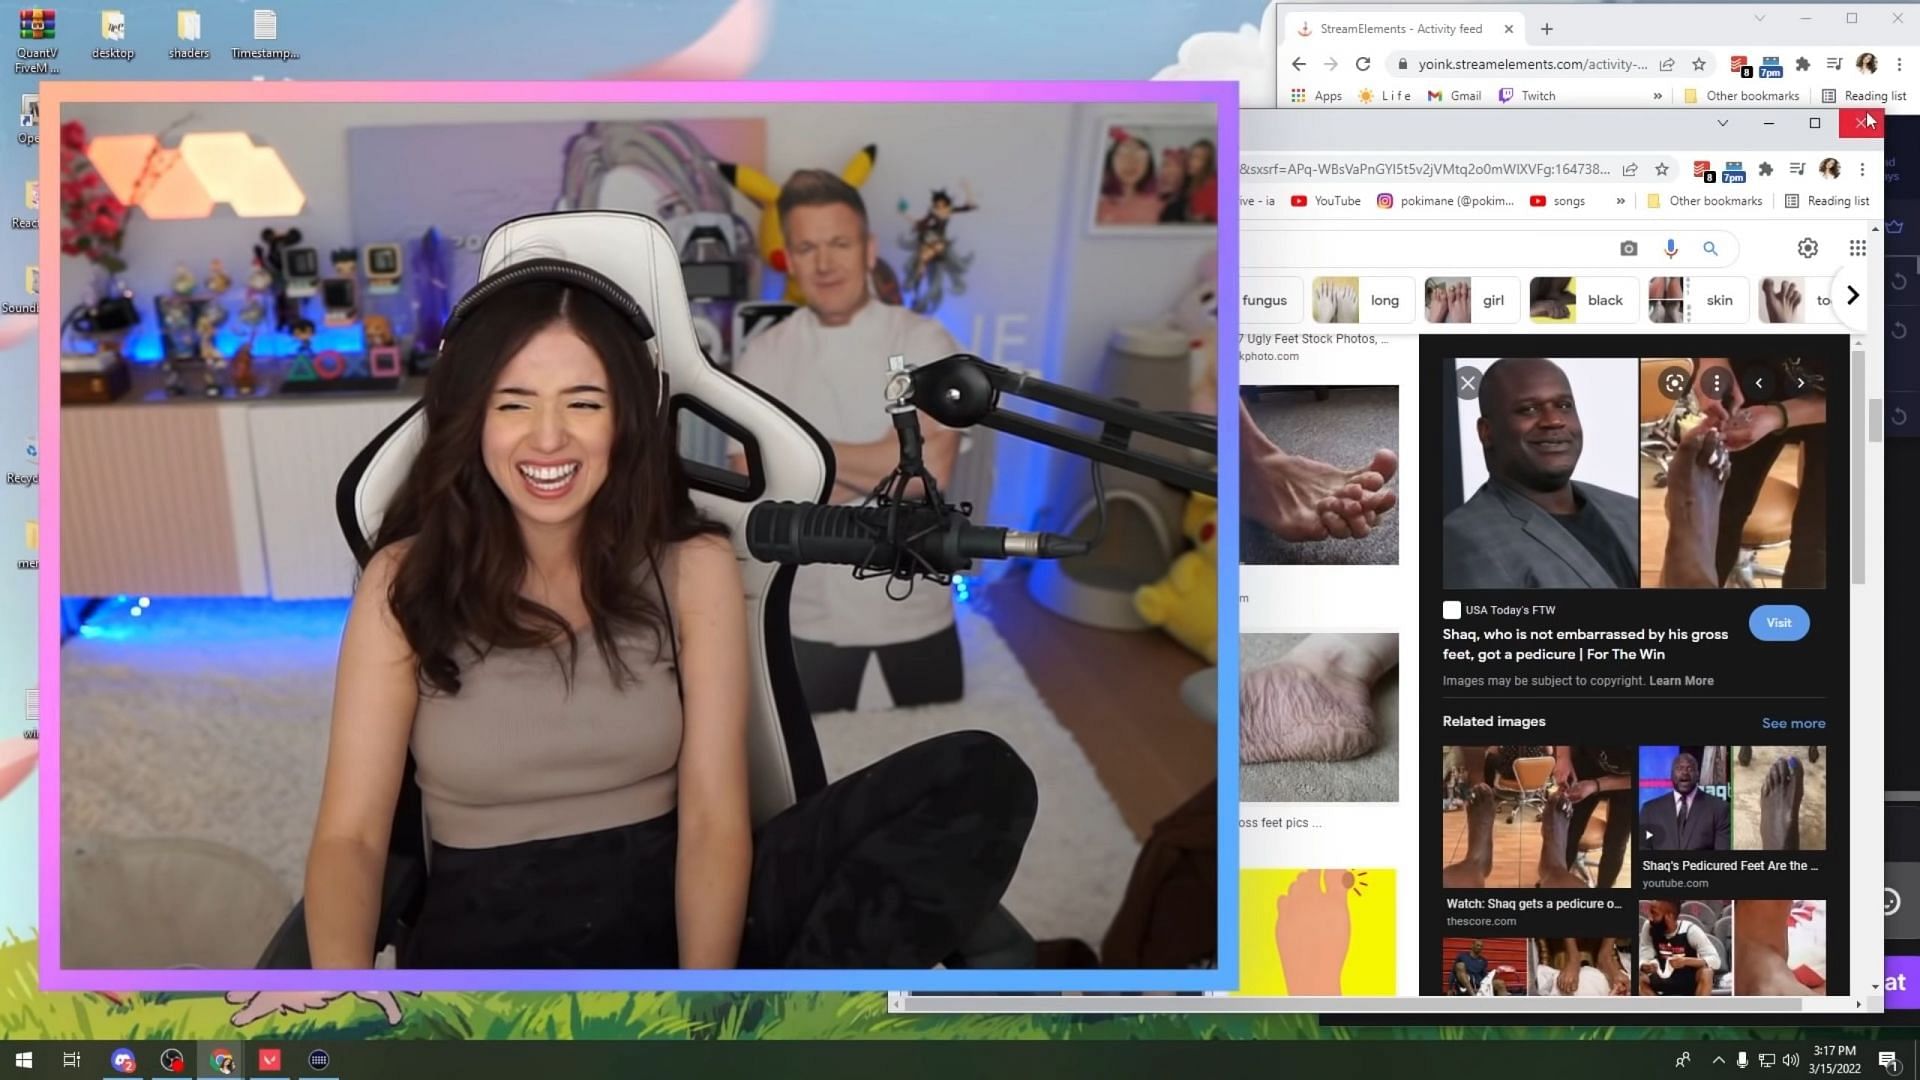 Poki losing it after seeing Shaq&#039;s feet pop up on her screen (Images via PokimaneToo/YouTube)